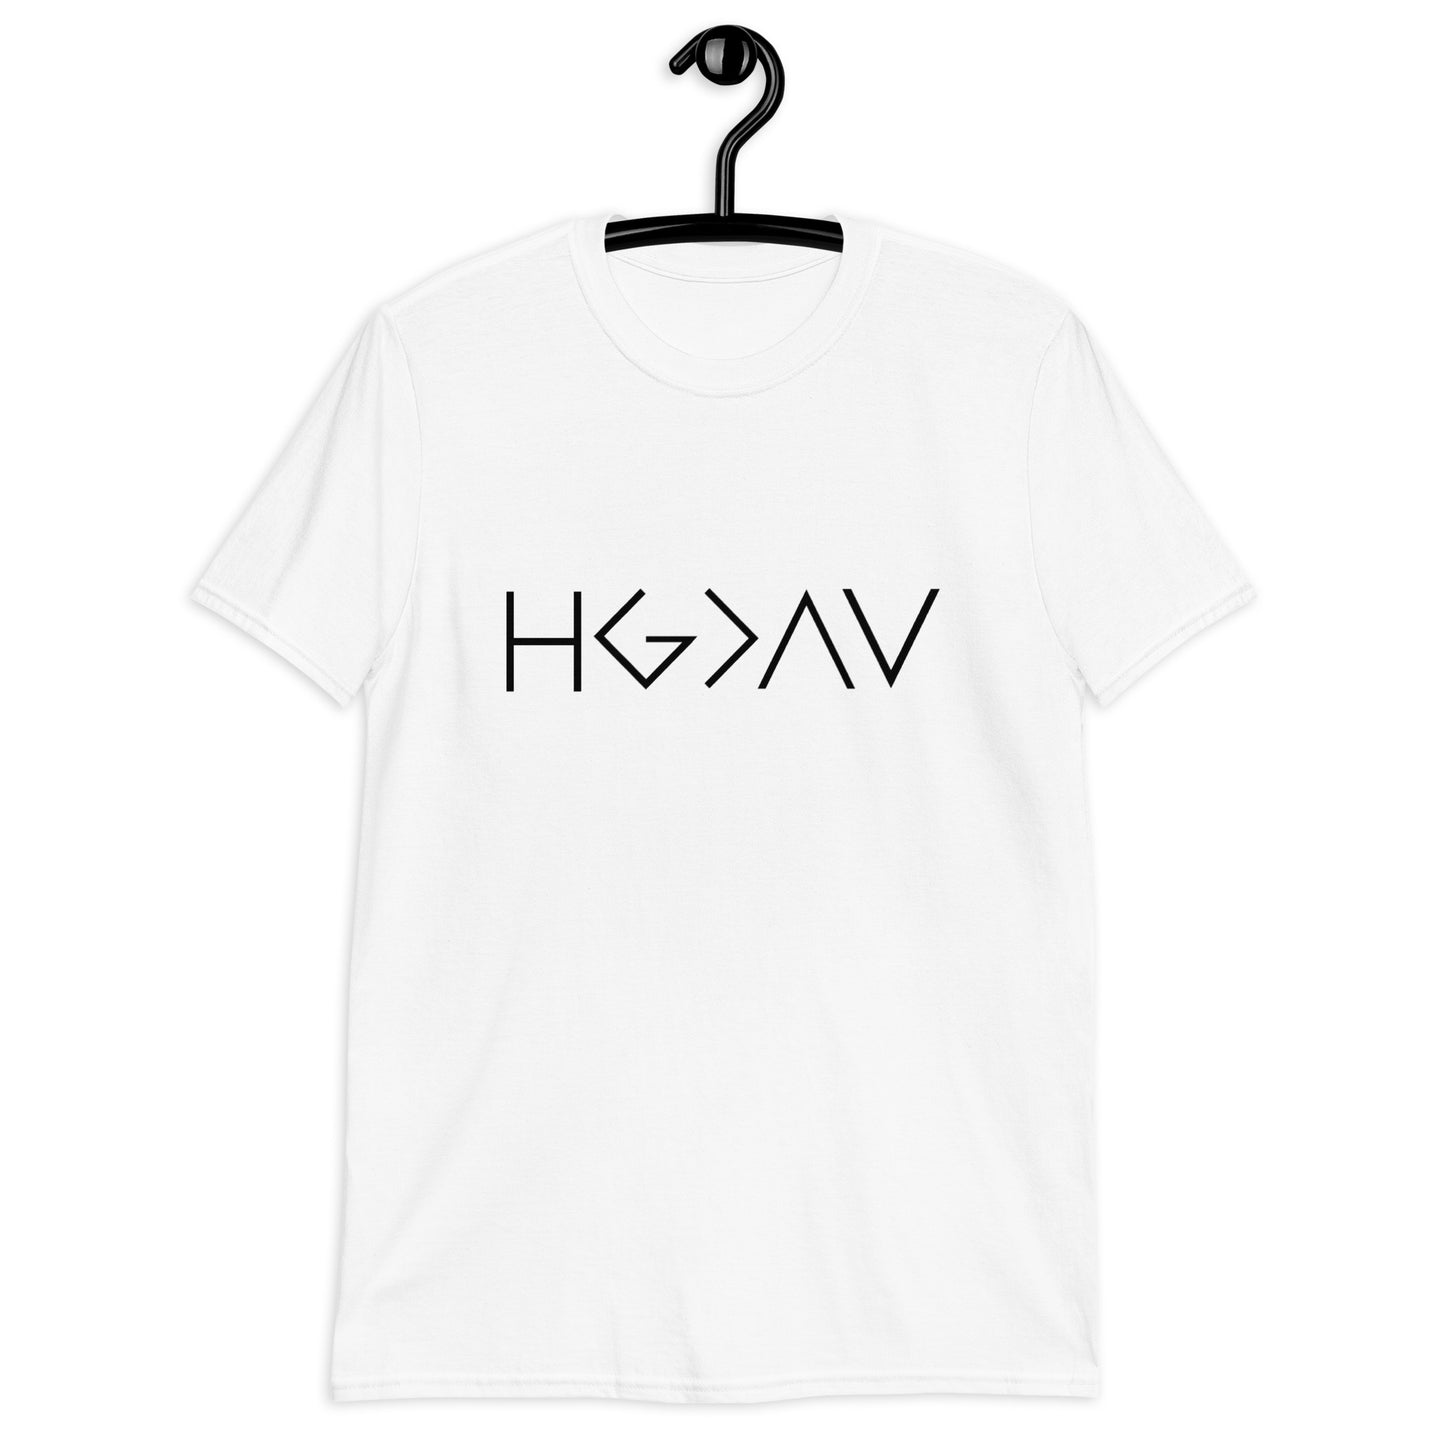 His Glory Over the Highs and Lows - Short-Sleeve Unisex T-Shirt